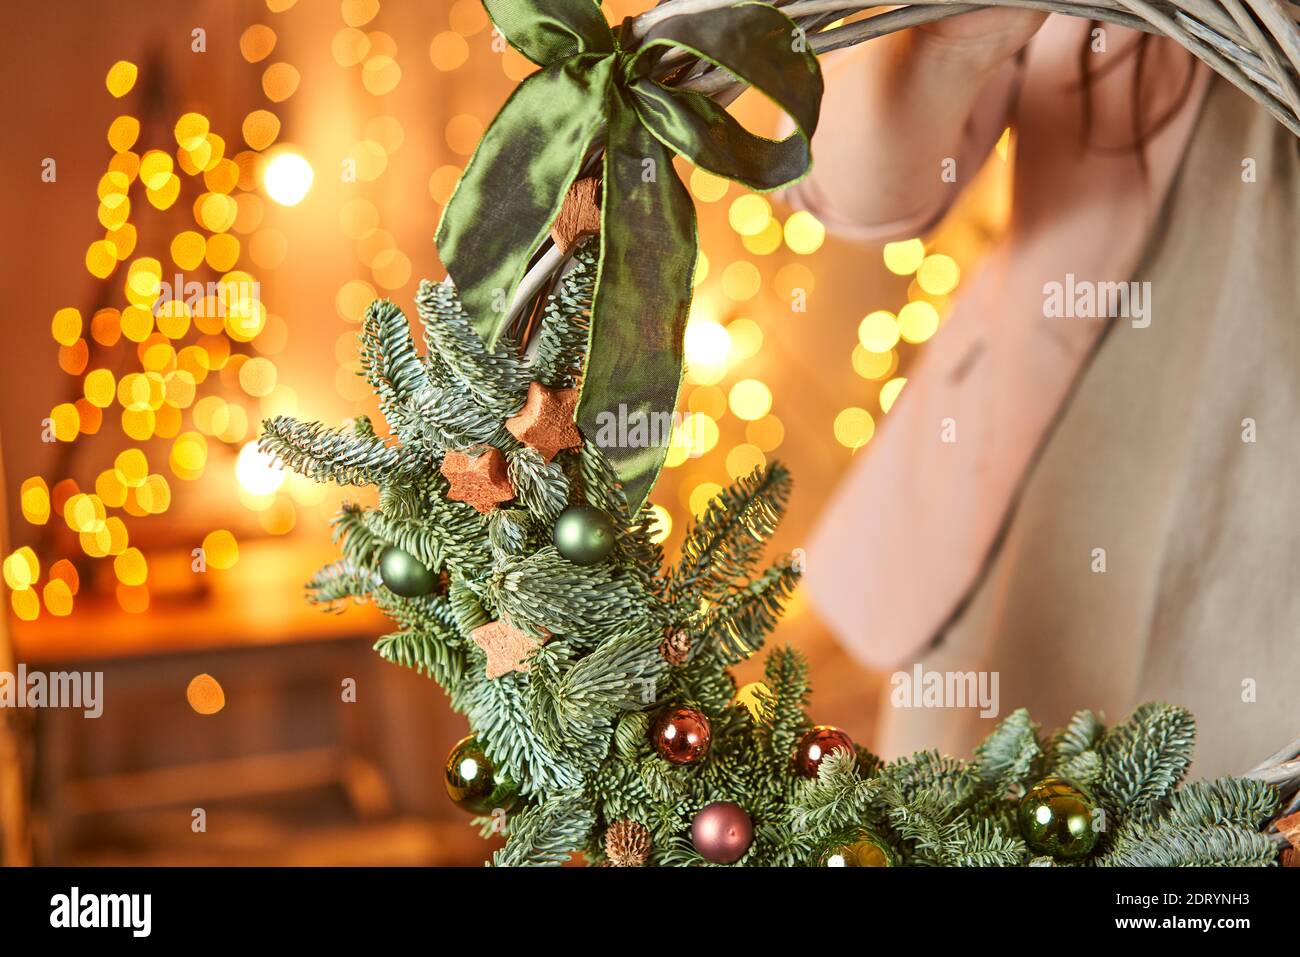 Young woman holding a Christmas wreath loop decorated fir branches and christmas toys for the holiday. The new year celebration. European flower shop Stock Photo